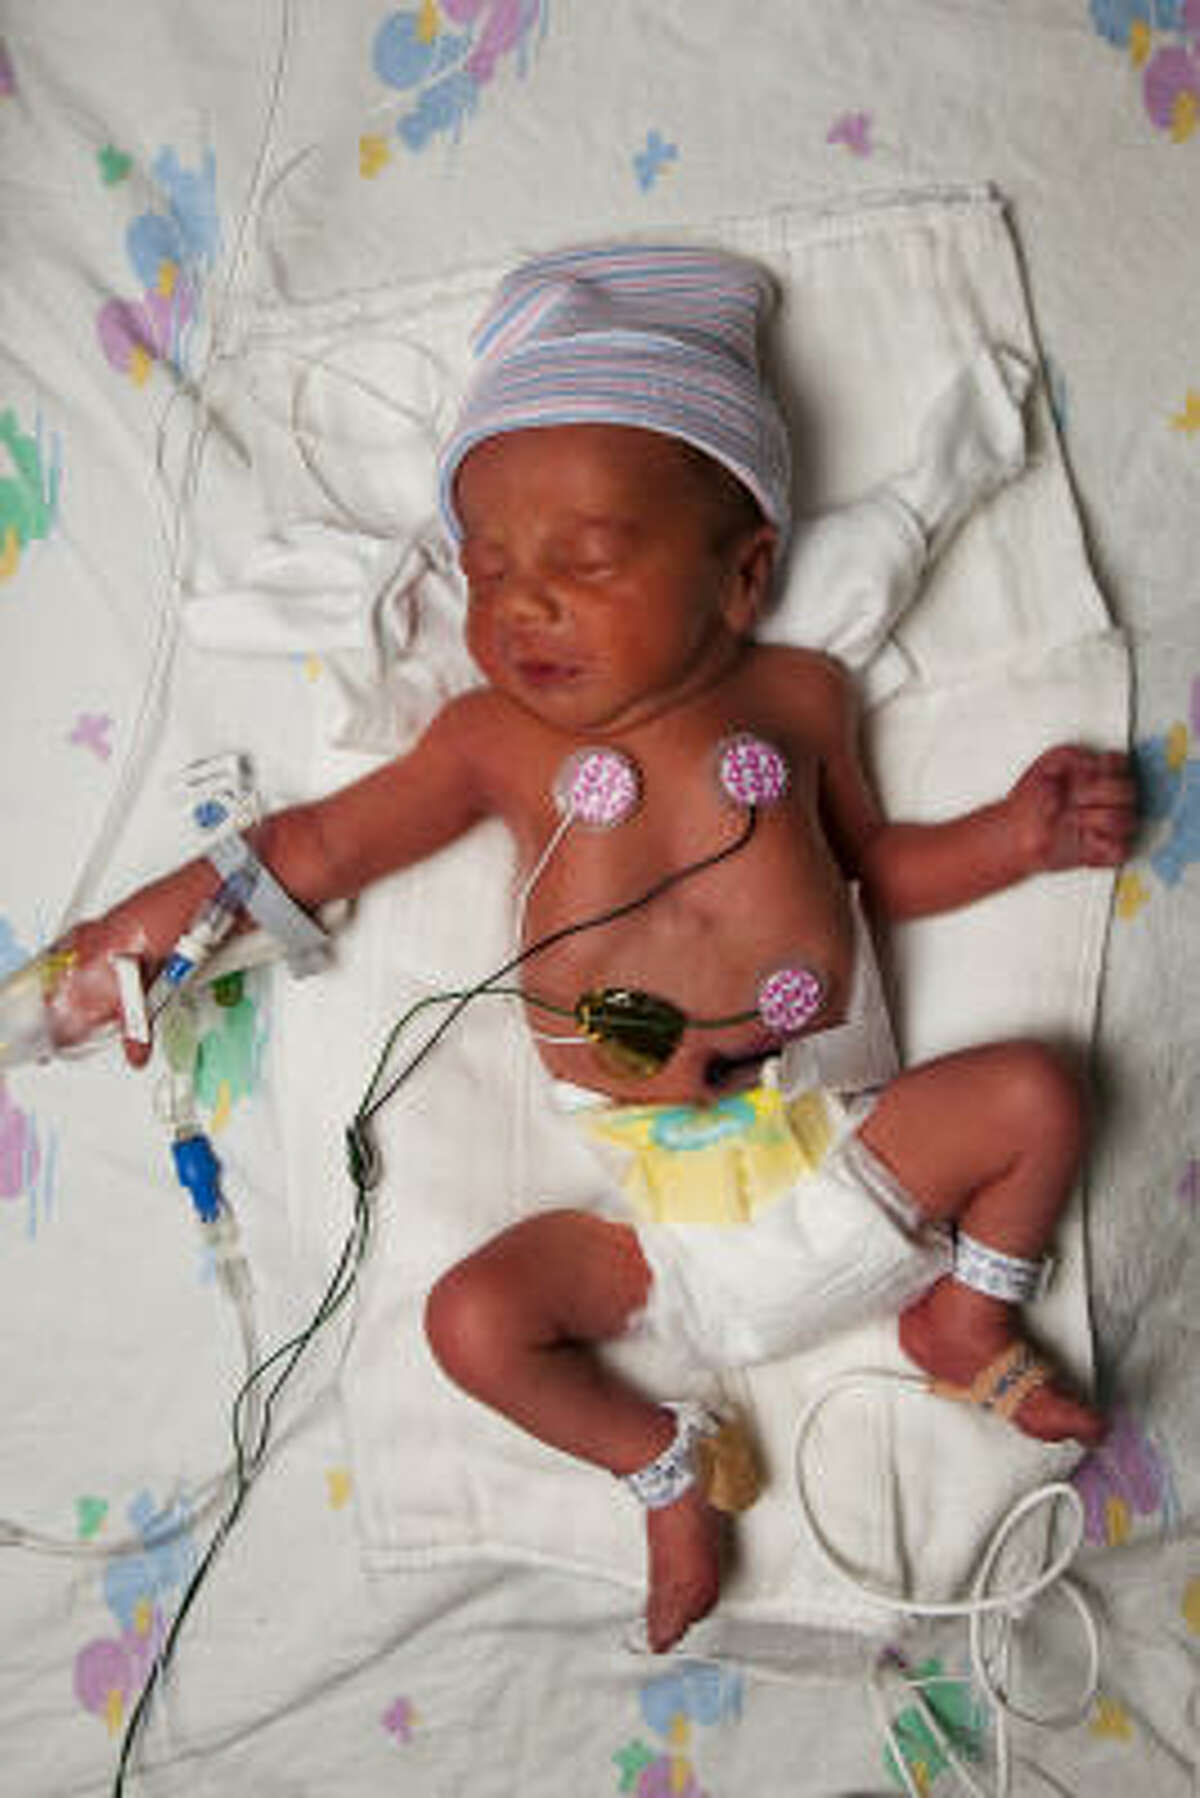 Carter Edward Lacombe photographed after three sets of baby triplets were born at The Woman's Hospital of Texas.